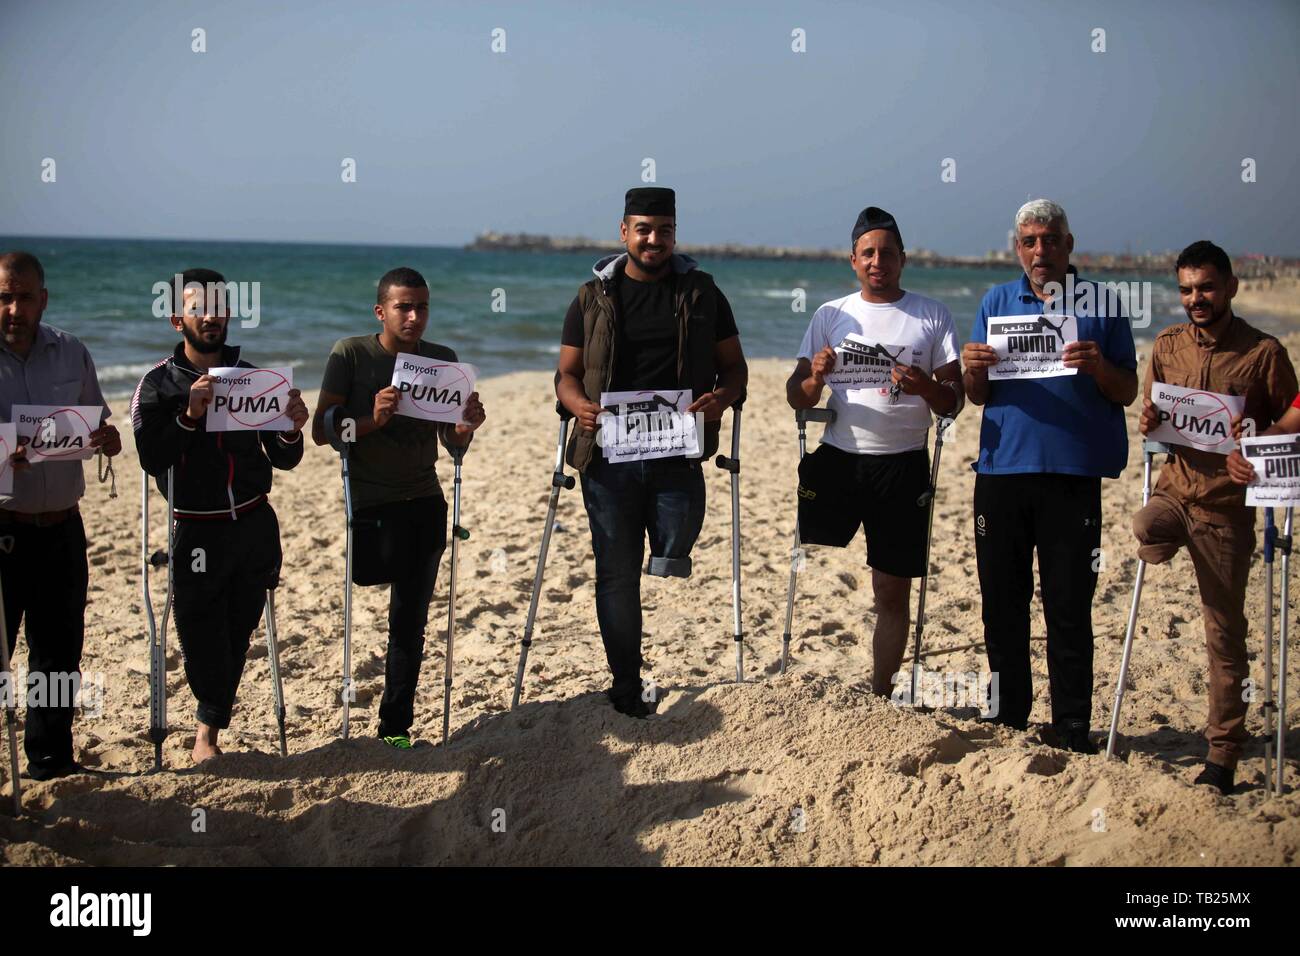 May 29, 2019 - Gaza City, Gaza Strip, Palestinian Territory - Wounded Palestinians, who were lose their legs during the clashes with Israeli troops, hold placards during a protest calling to boycott Puma sport company, on the beach of Gaza city on May 29, 2019. Puma is the main sponsor of the Israel Football Association (IFA), which includes teams in Israelâ€™s illegal settlements on occupied Palestinian  (Credit Image: © Mahmoud Ajjour/APA Images via ZUMA Wire) Stock Photo